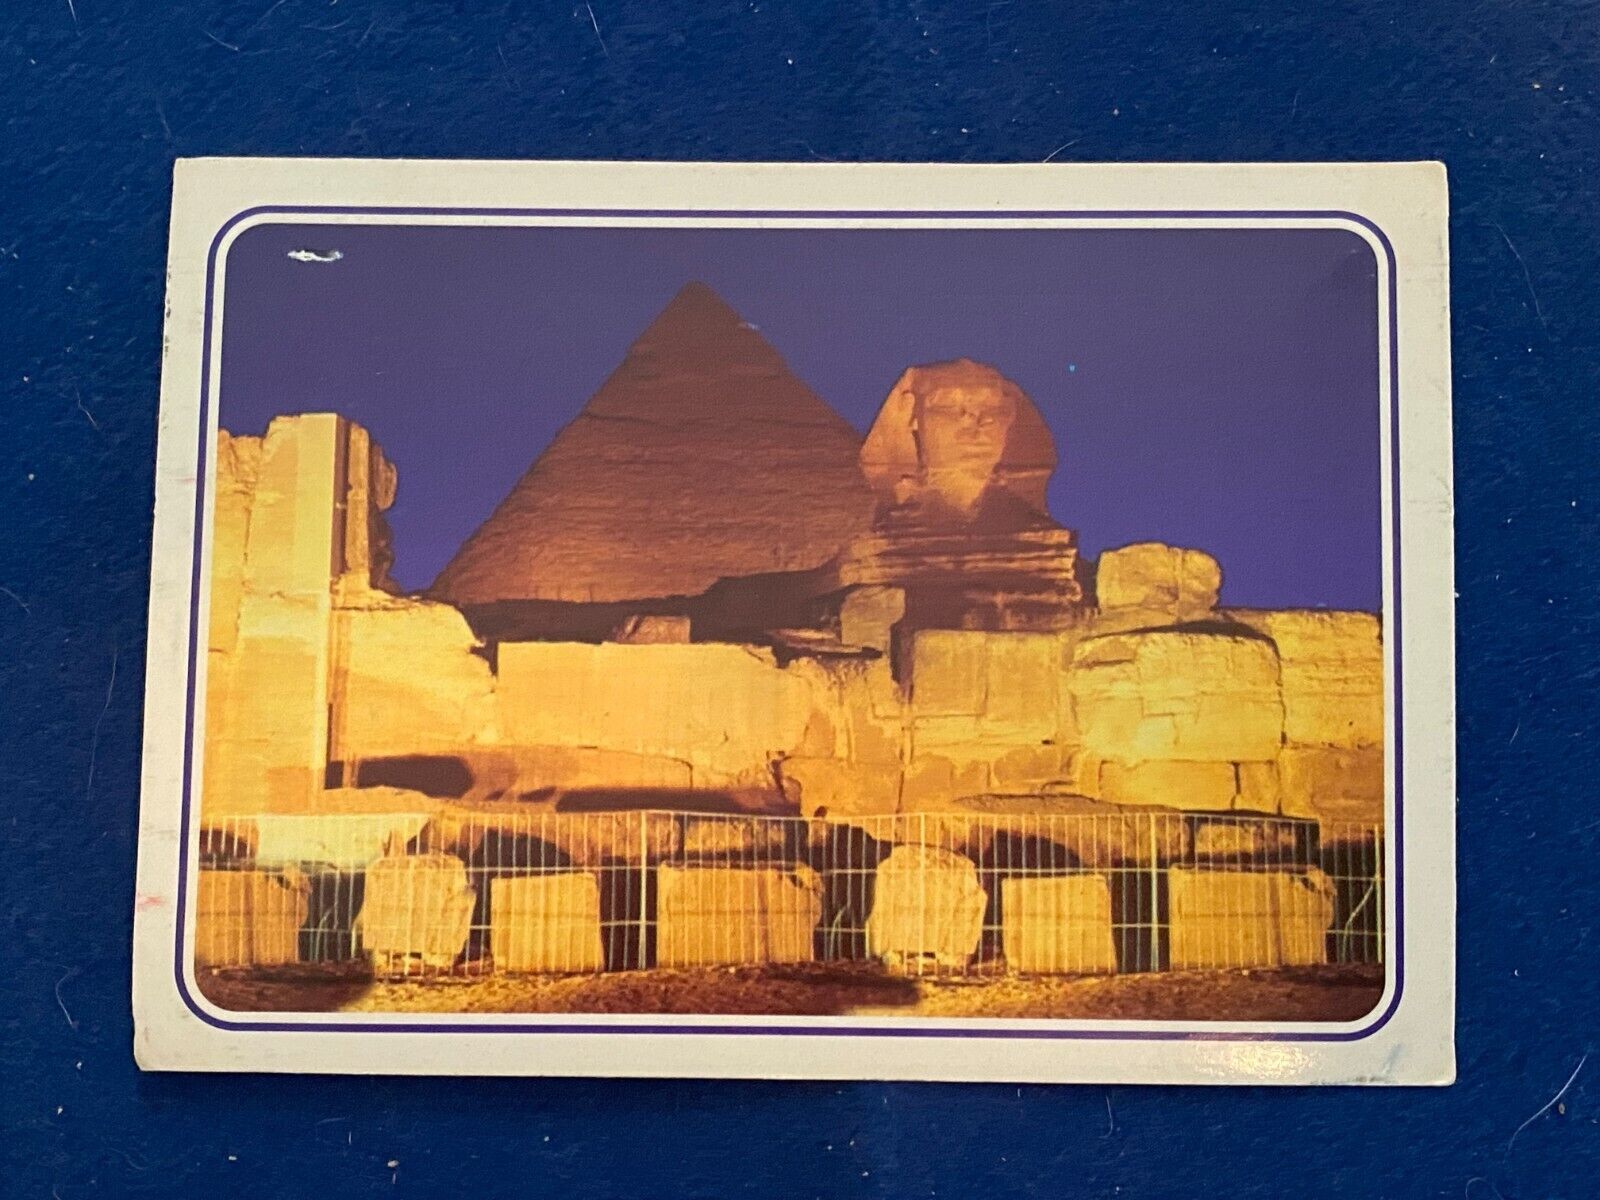 2005 Post Card from the Pyramids of Giza, Egypt.